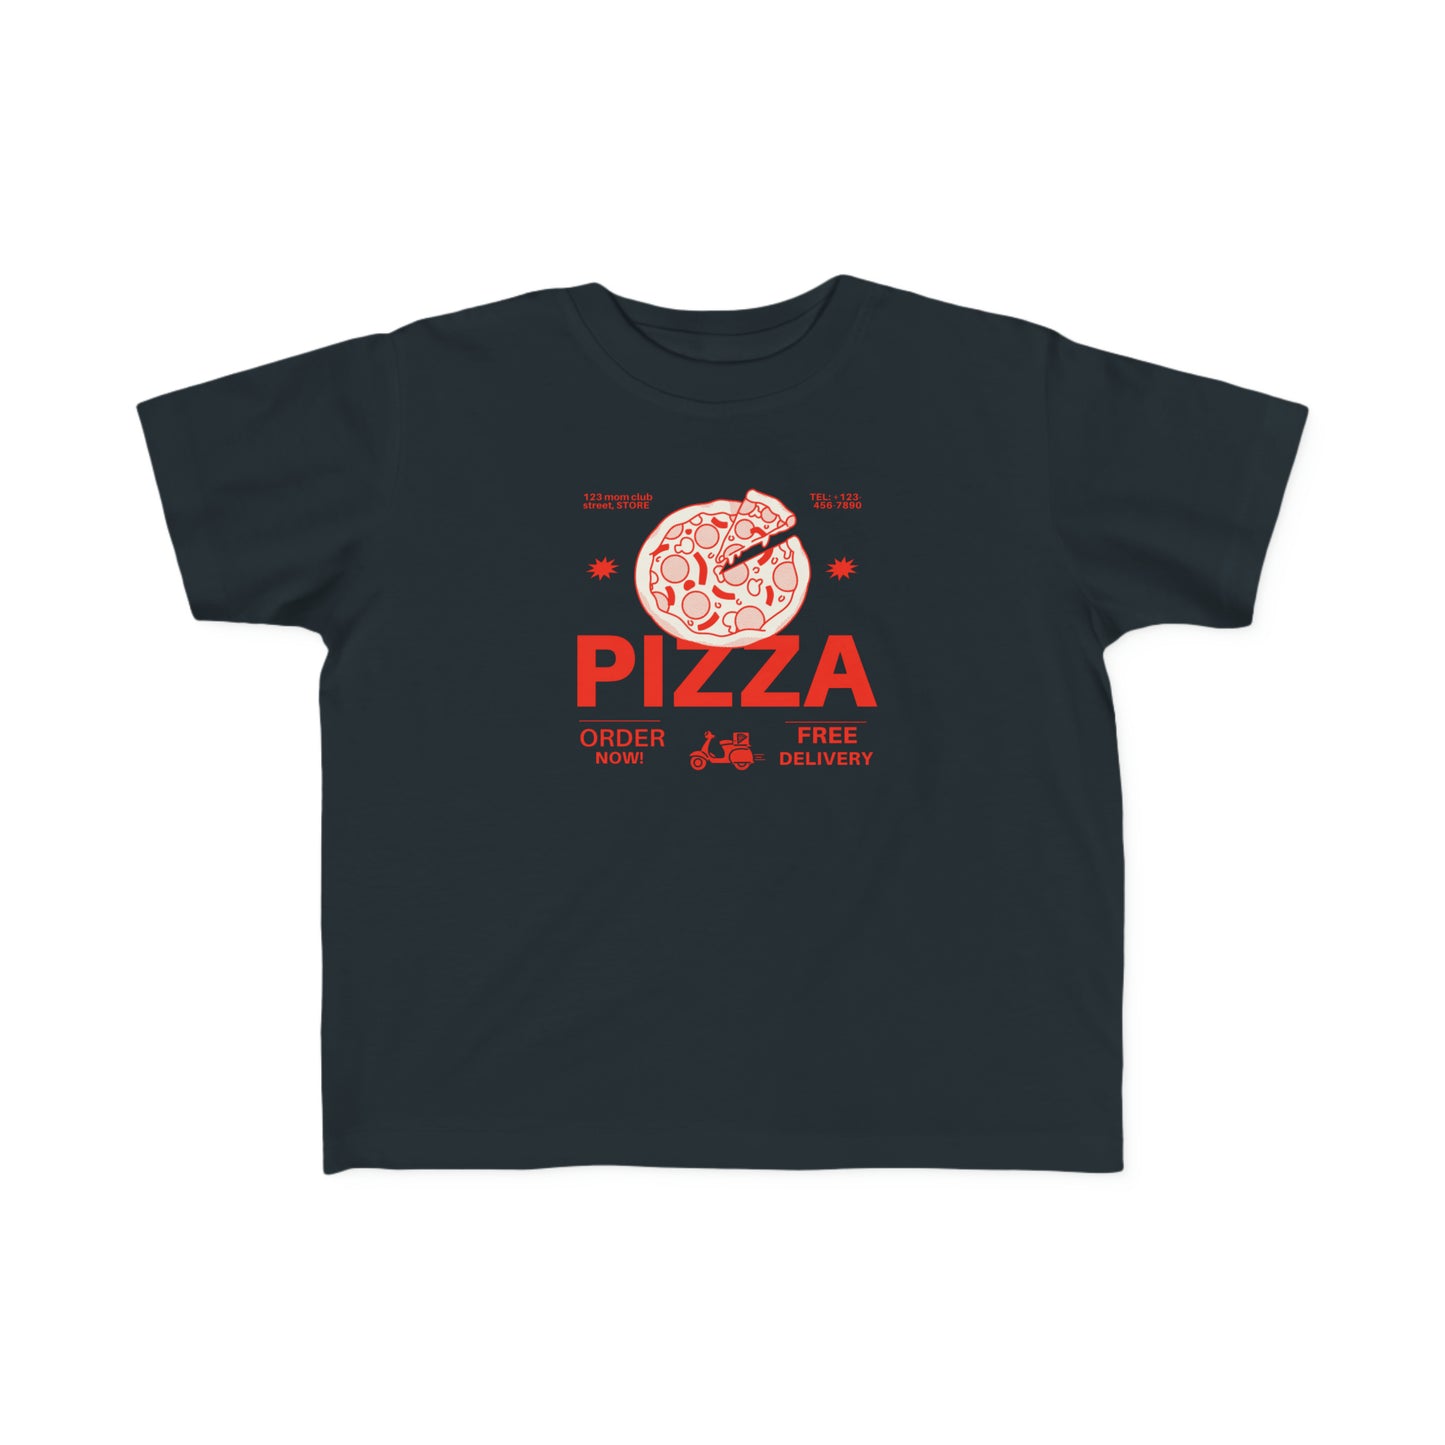 English PIZZA DELIVERY t-shirt - toddler